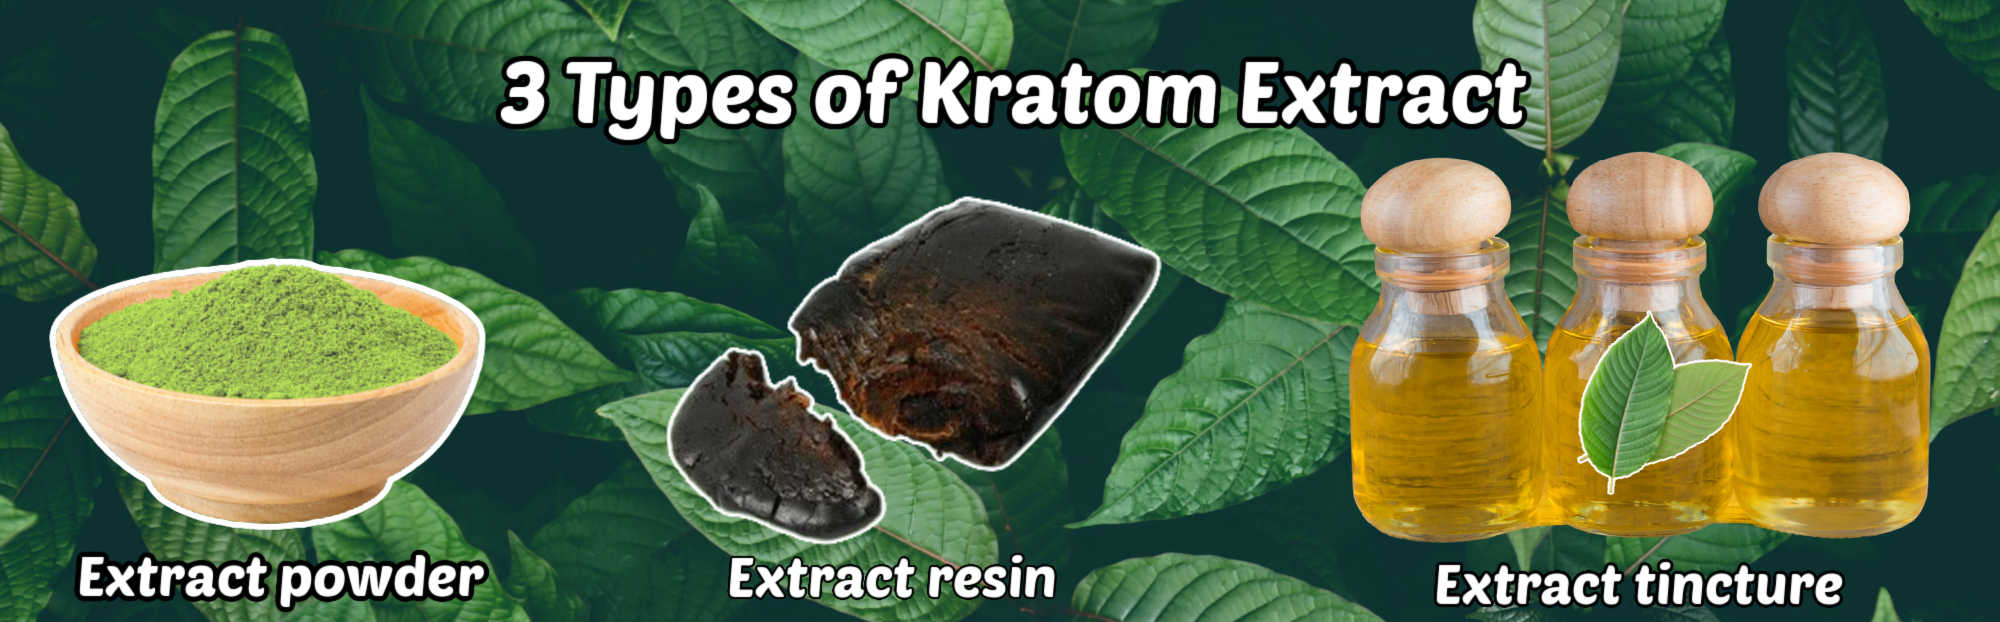 image of 3 types of kratom extract